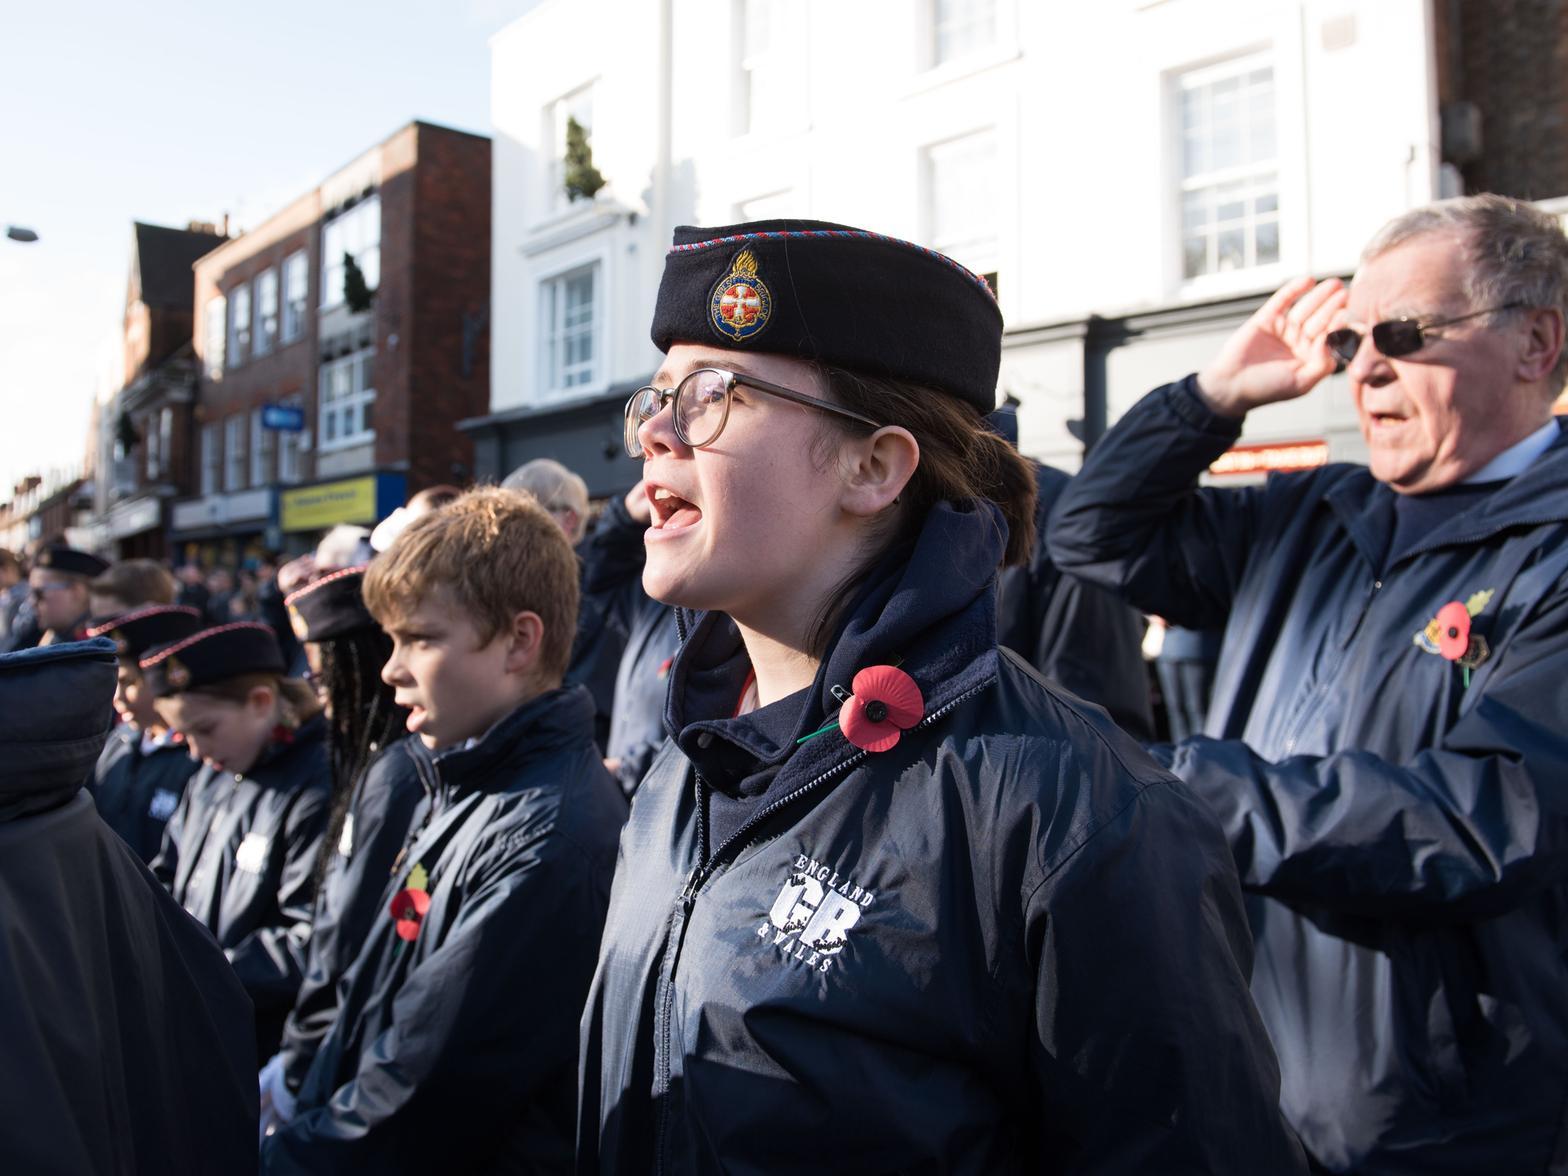 Aylesbury fell silent at 11am on Sunday, to remember those who have given their lives in conflicts around the world.